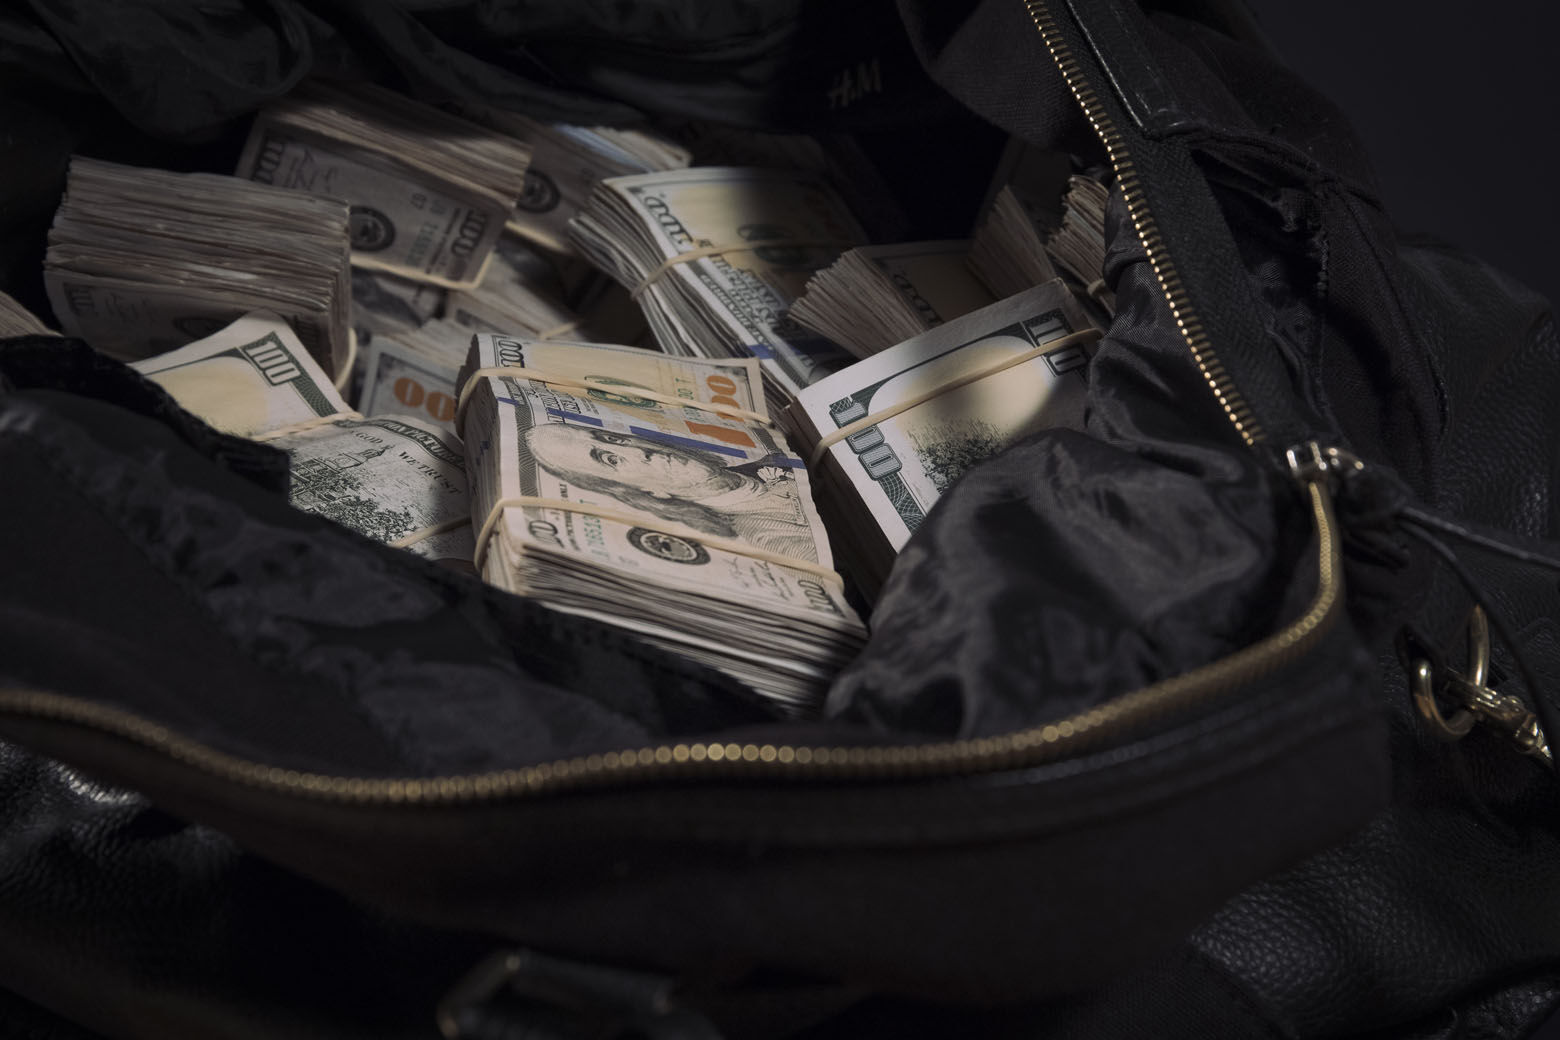 Bag full of cash becomes trouble for Connecticut man